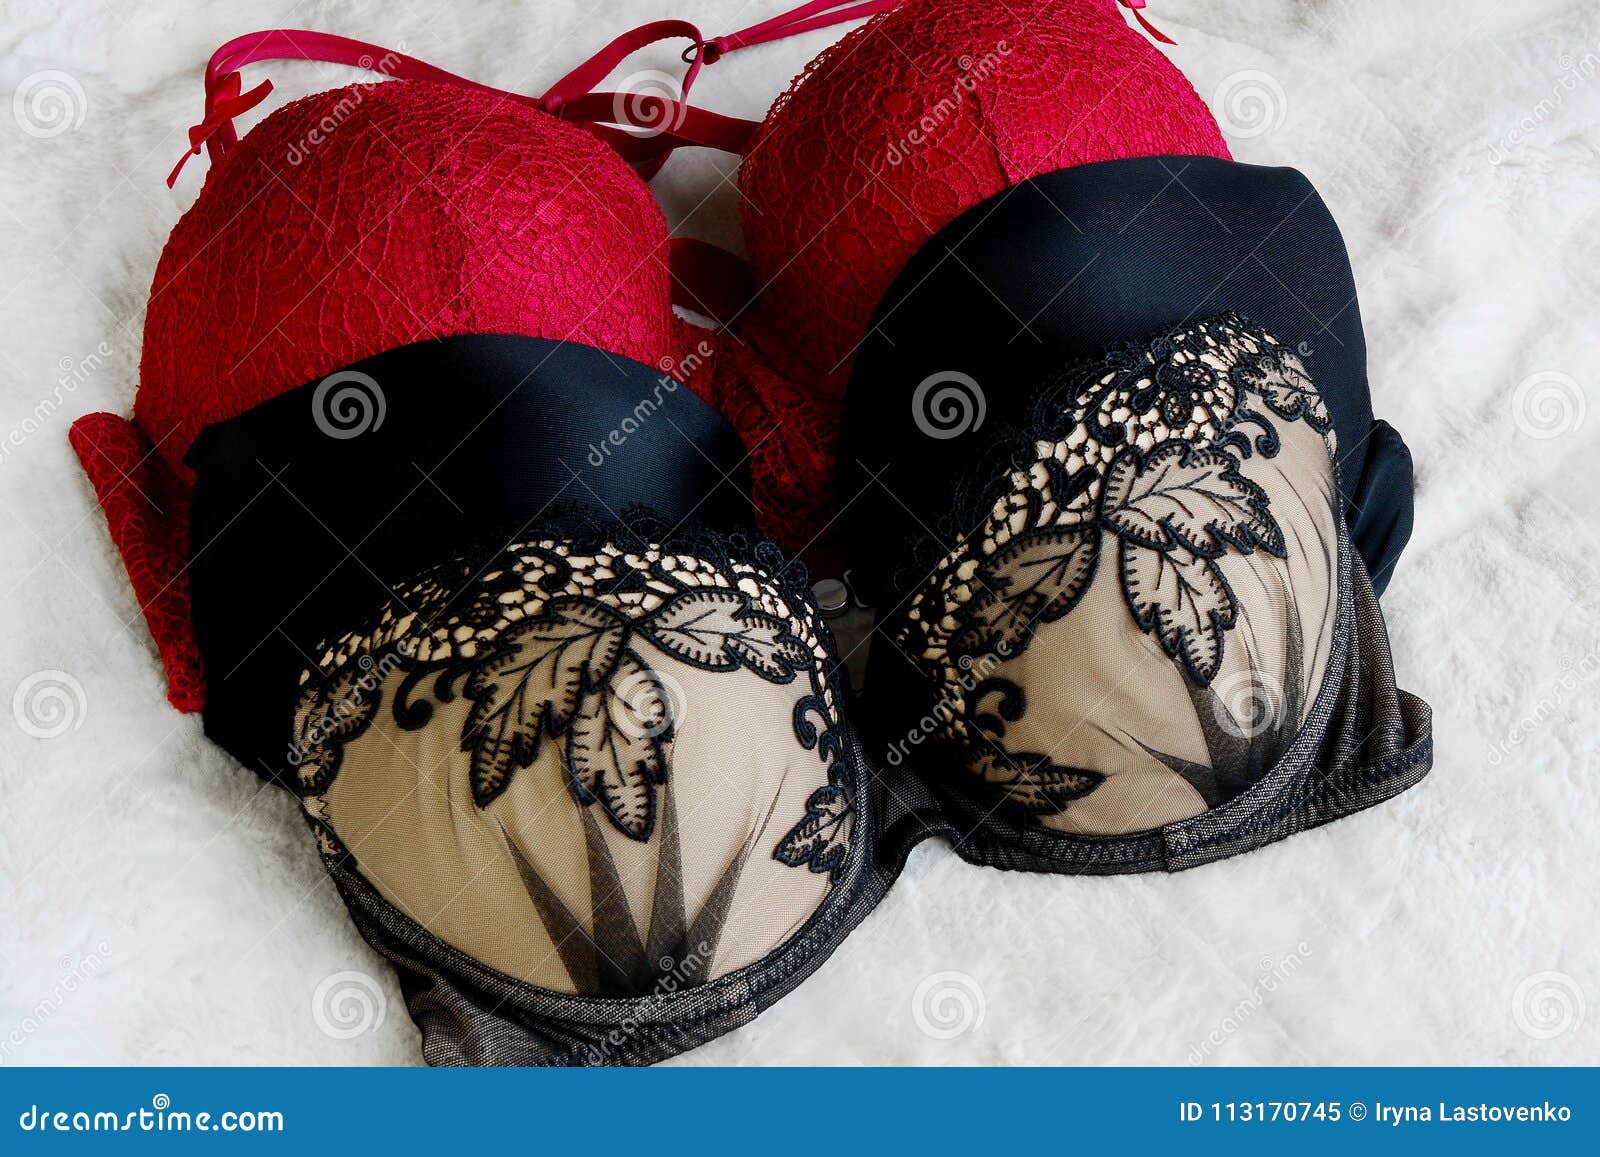 Women`s Lace Underwear of Red and Black Color, Bra. Stock Image